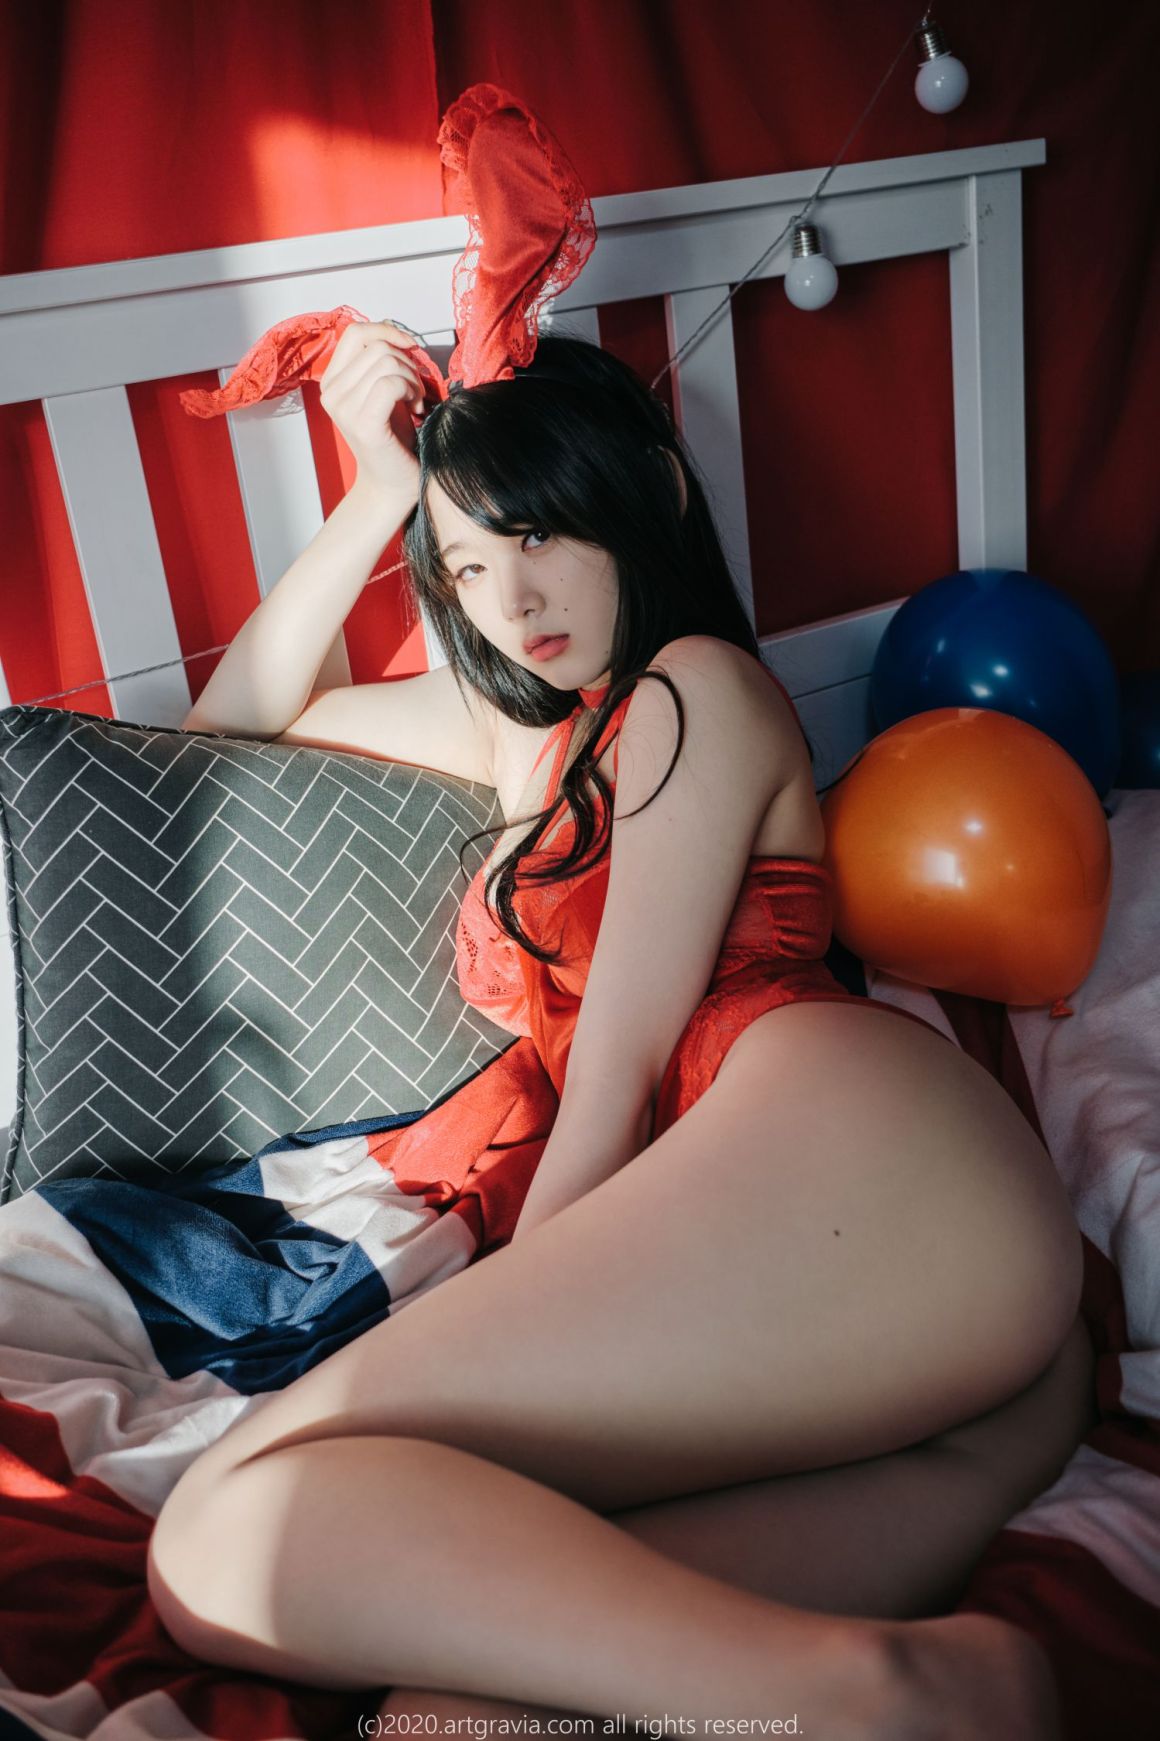 AsianOnlyfans.com 44 330 20211009